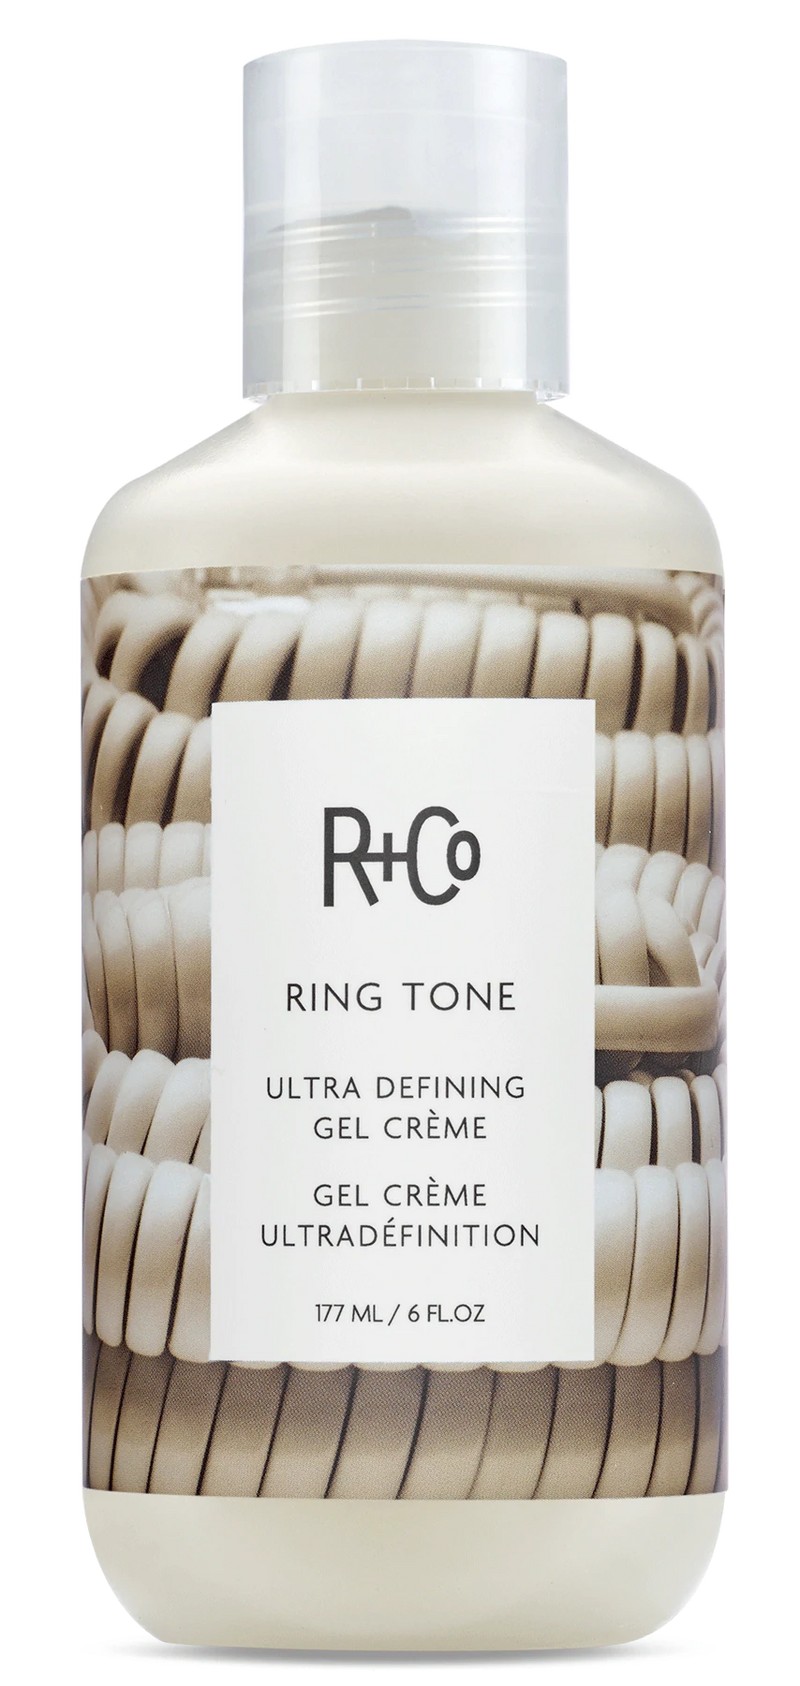 R + CO Ring Tone - Totality Medispa and Skincare